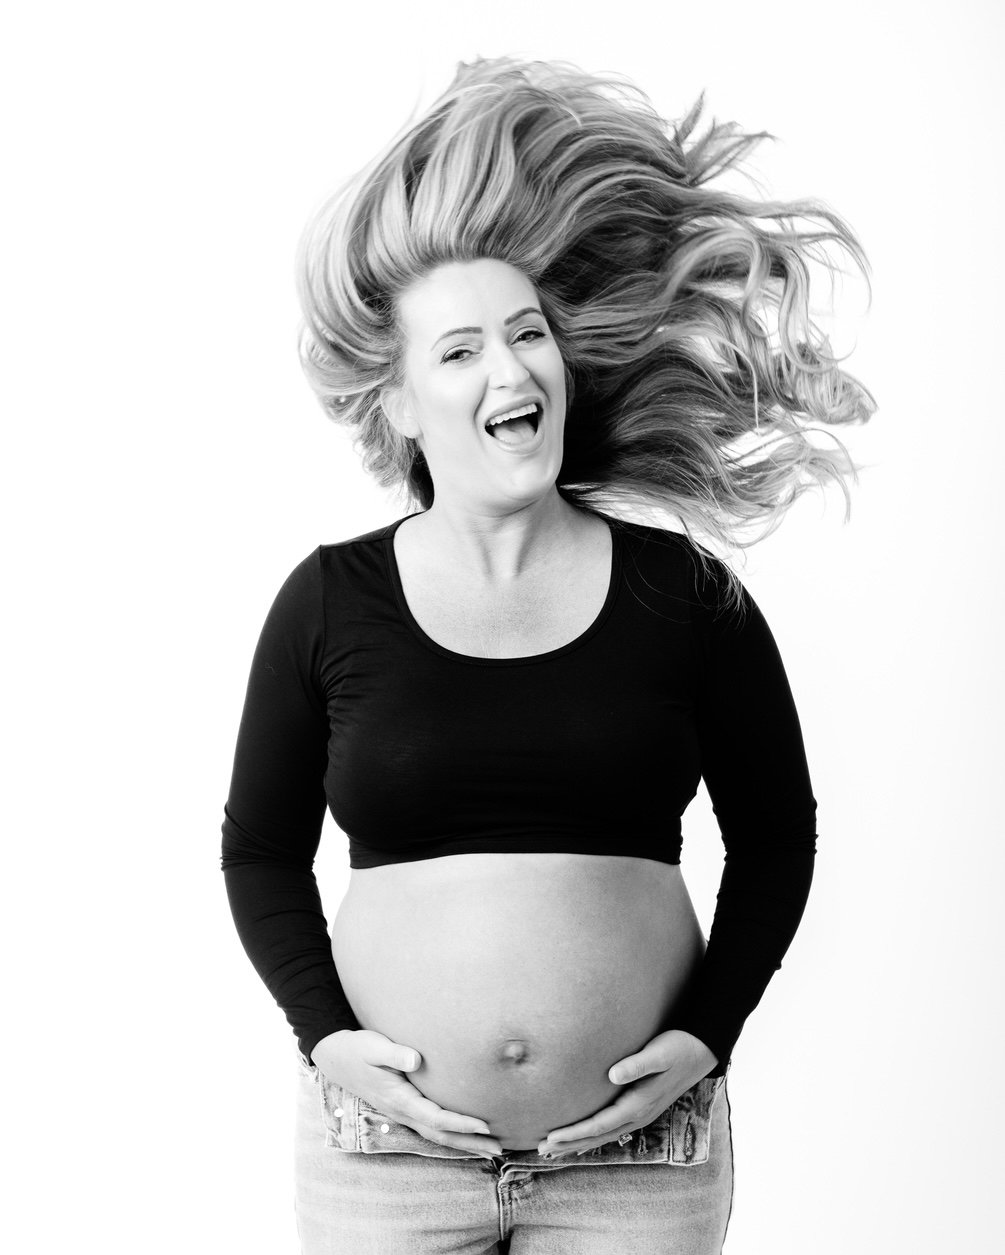 No studio maternity session would be complete without a fun hair flip shot.